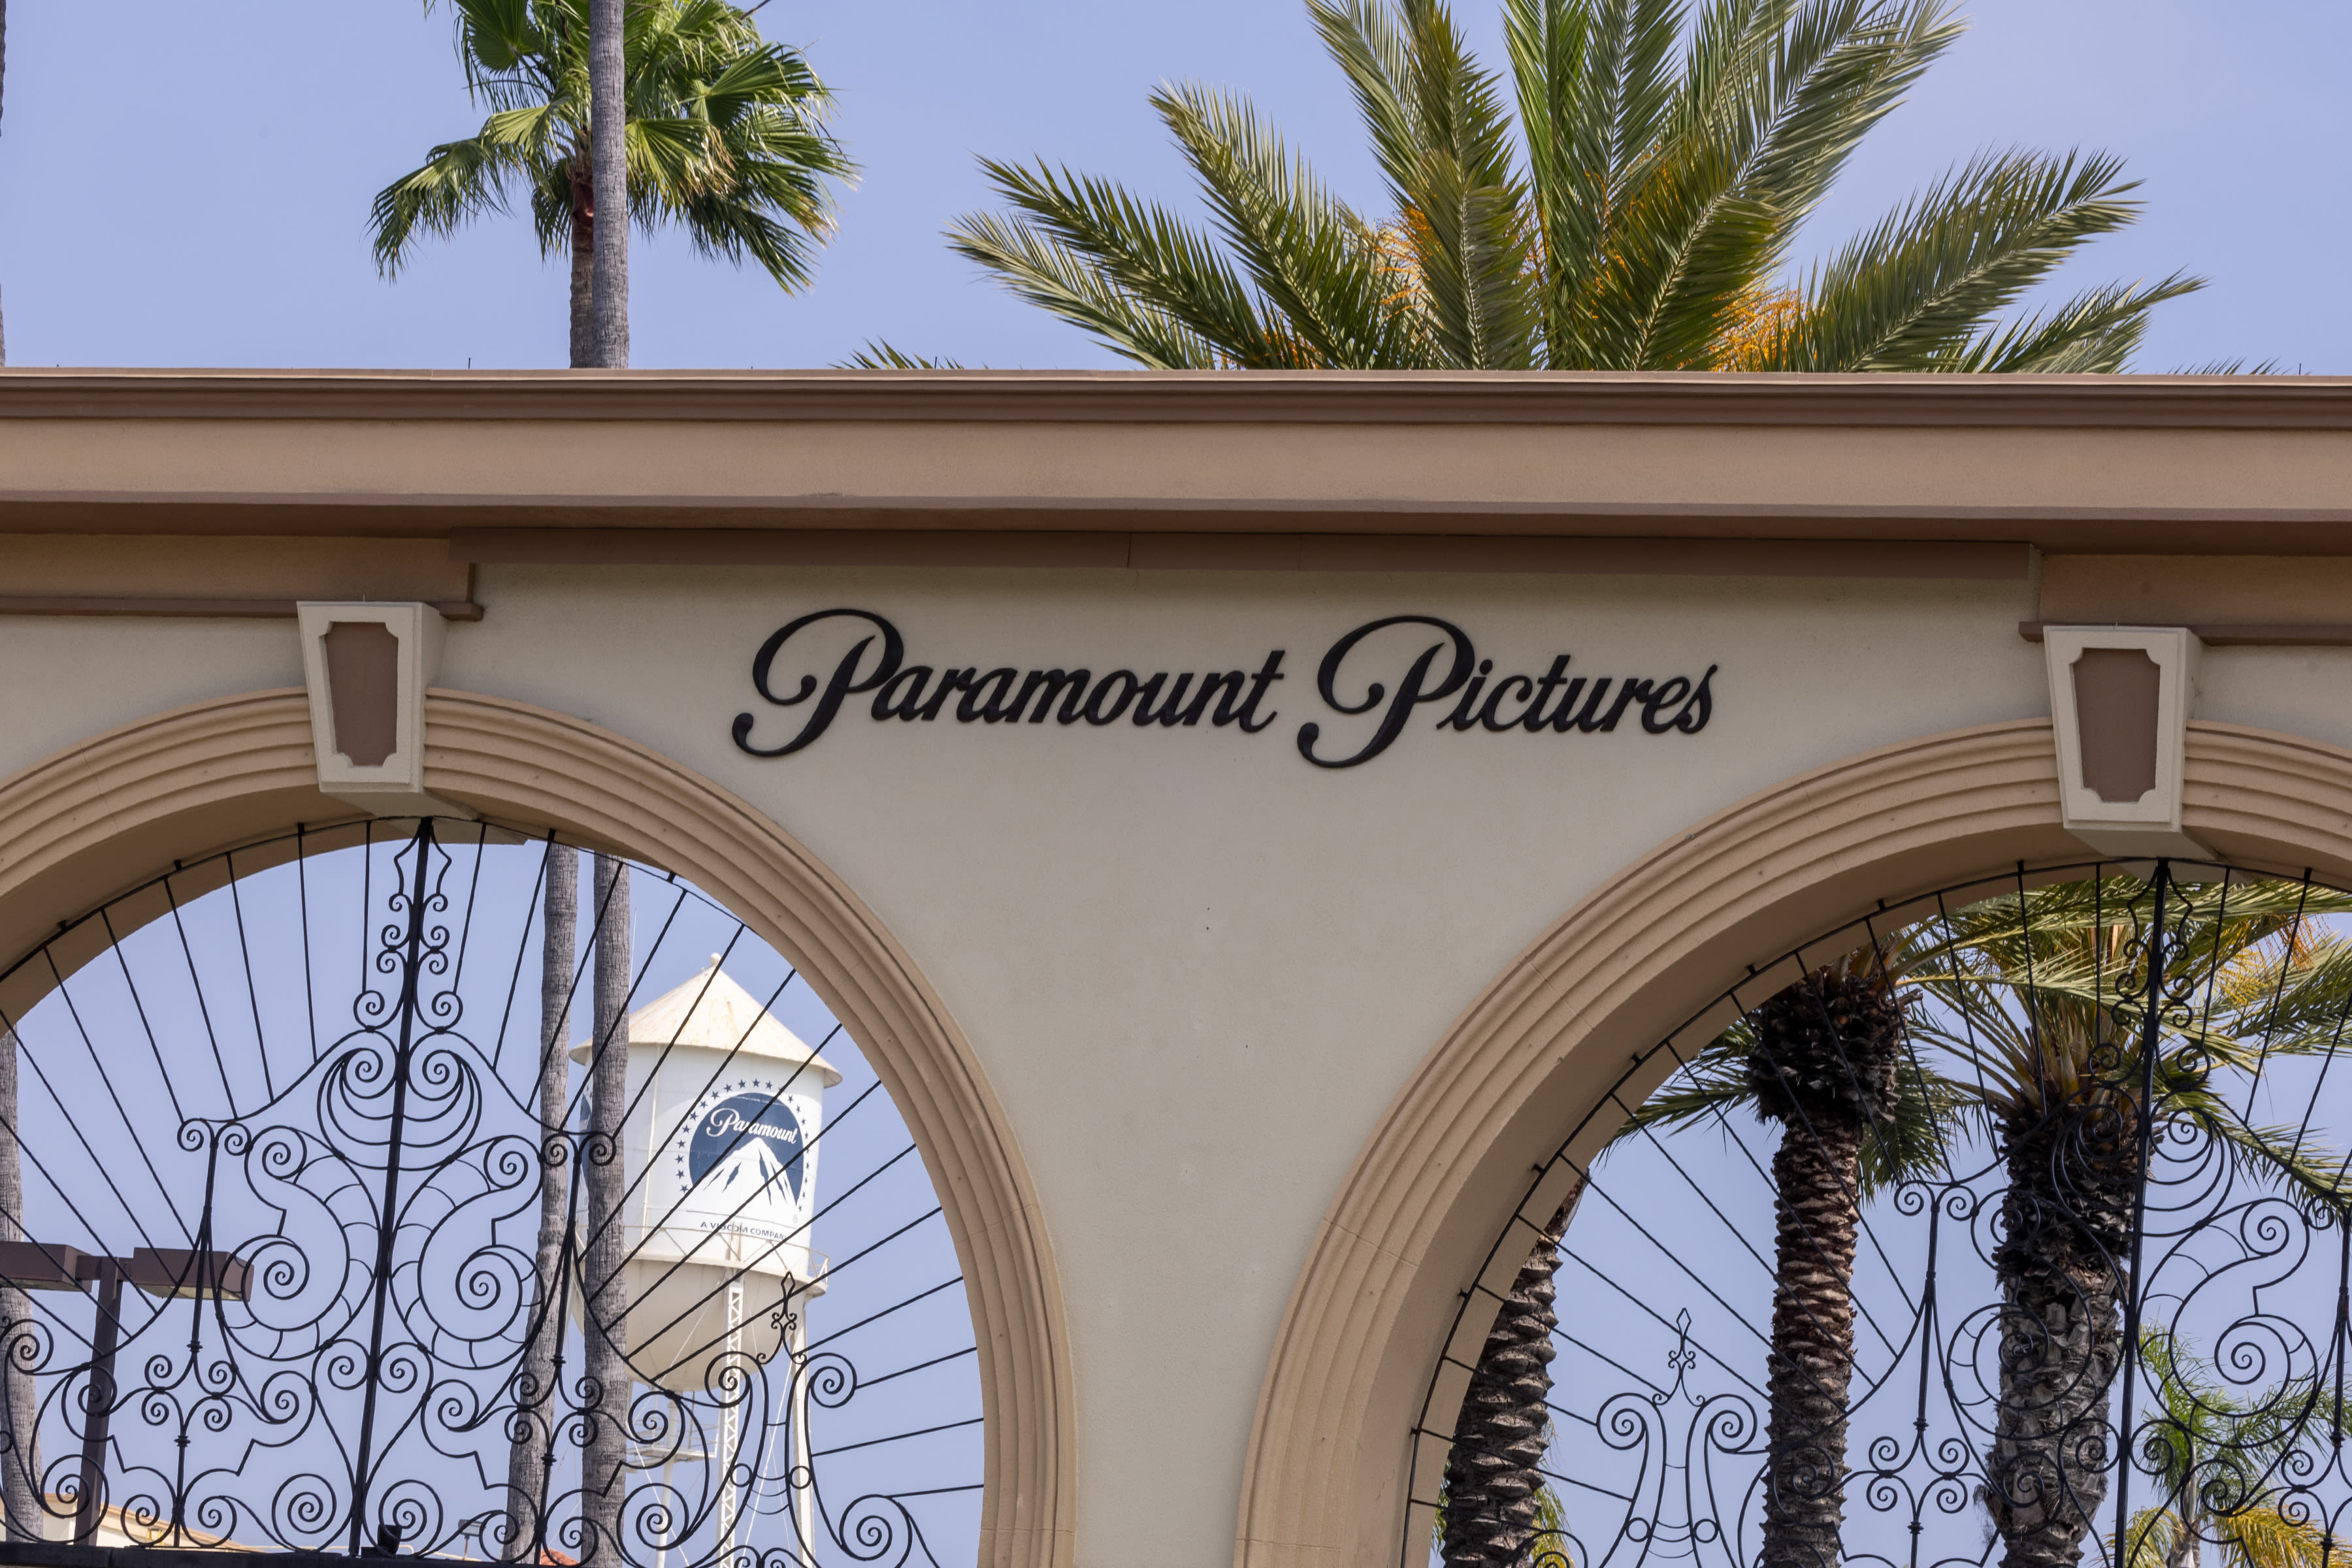 Barry Diller expresses interest in Redstone family firm (and Paramount controlling shareholder)